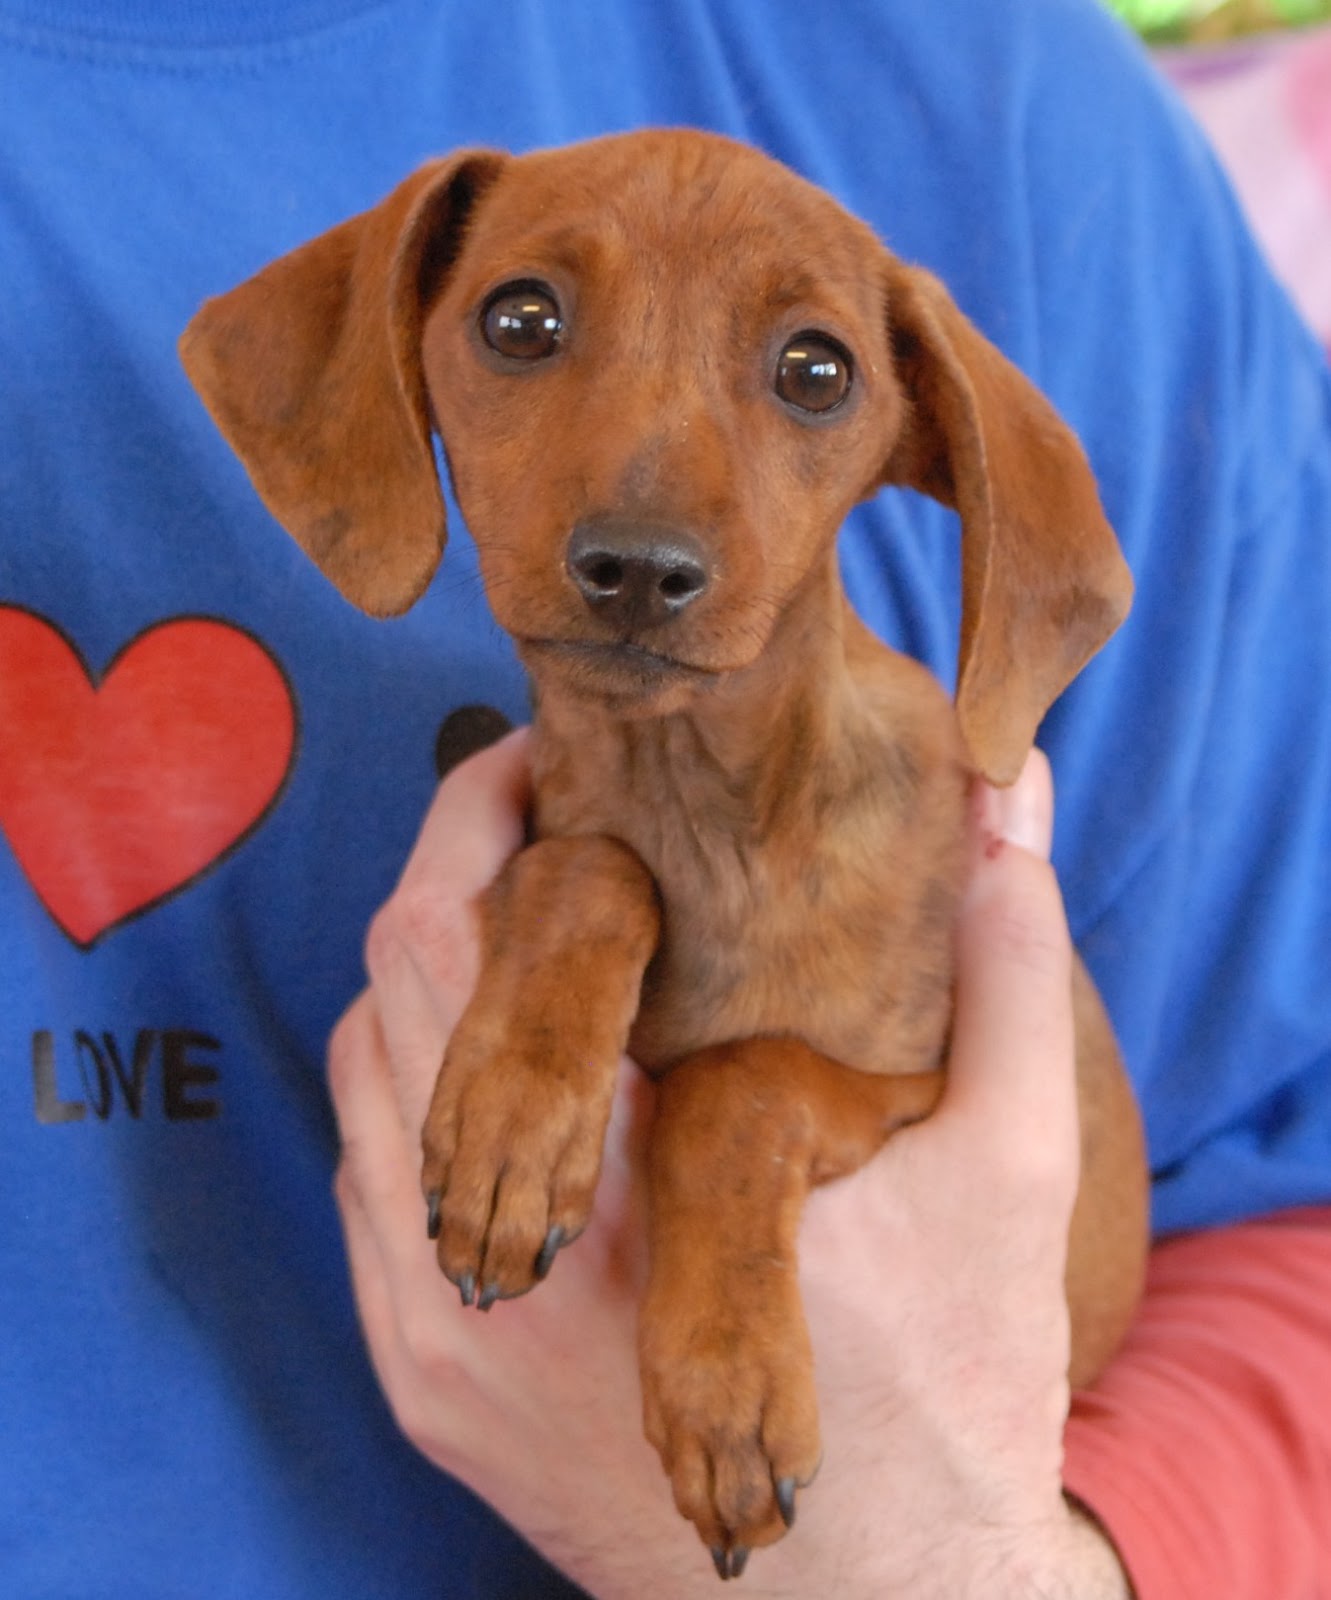 Dachshund mix baby angels ready for adoption.